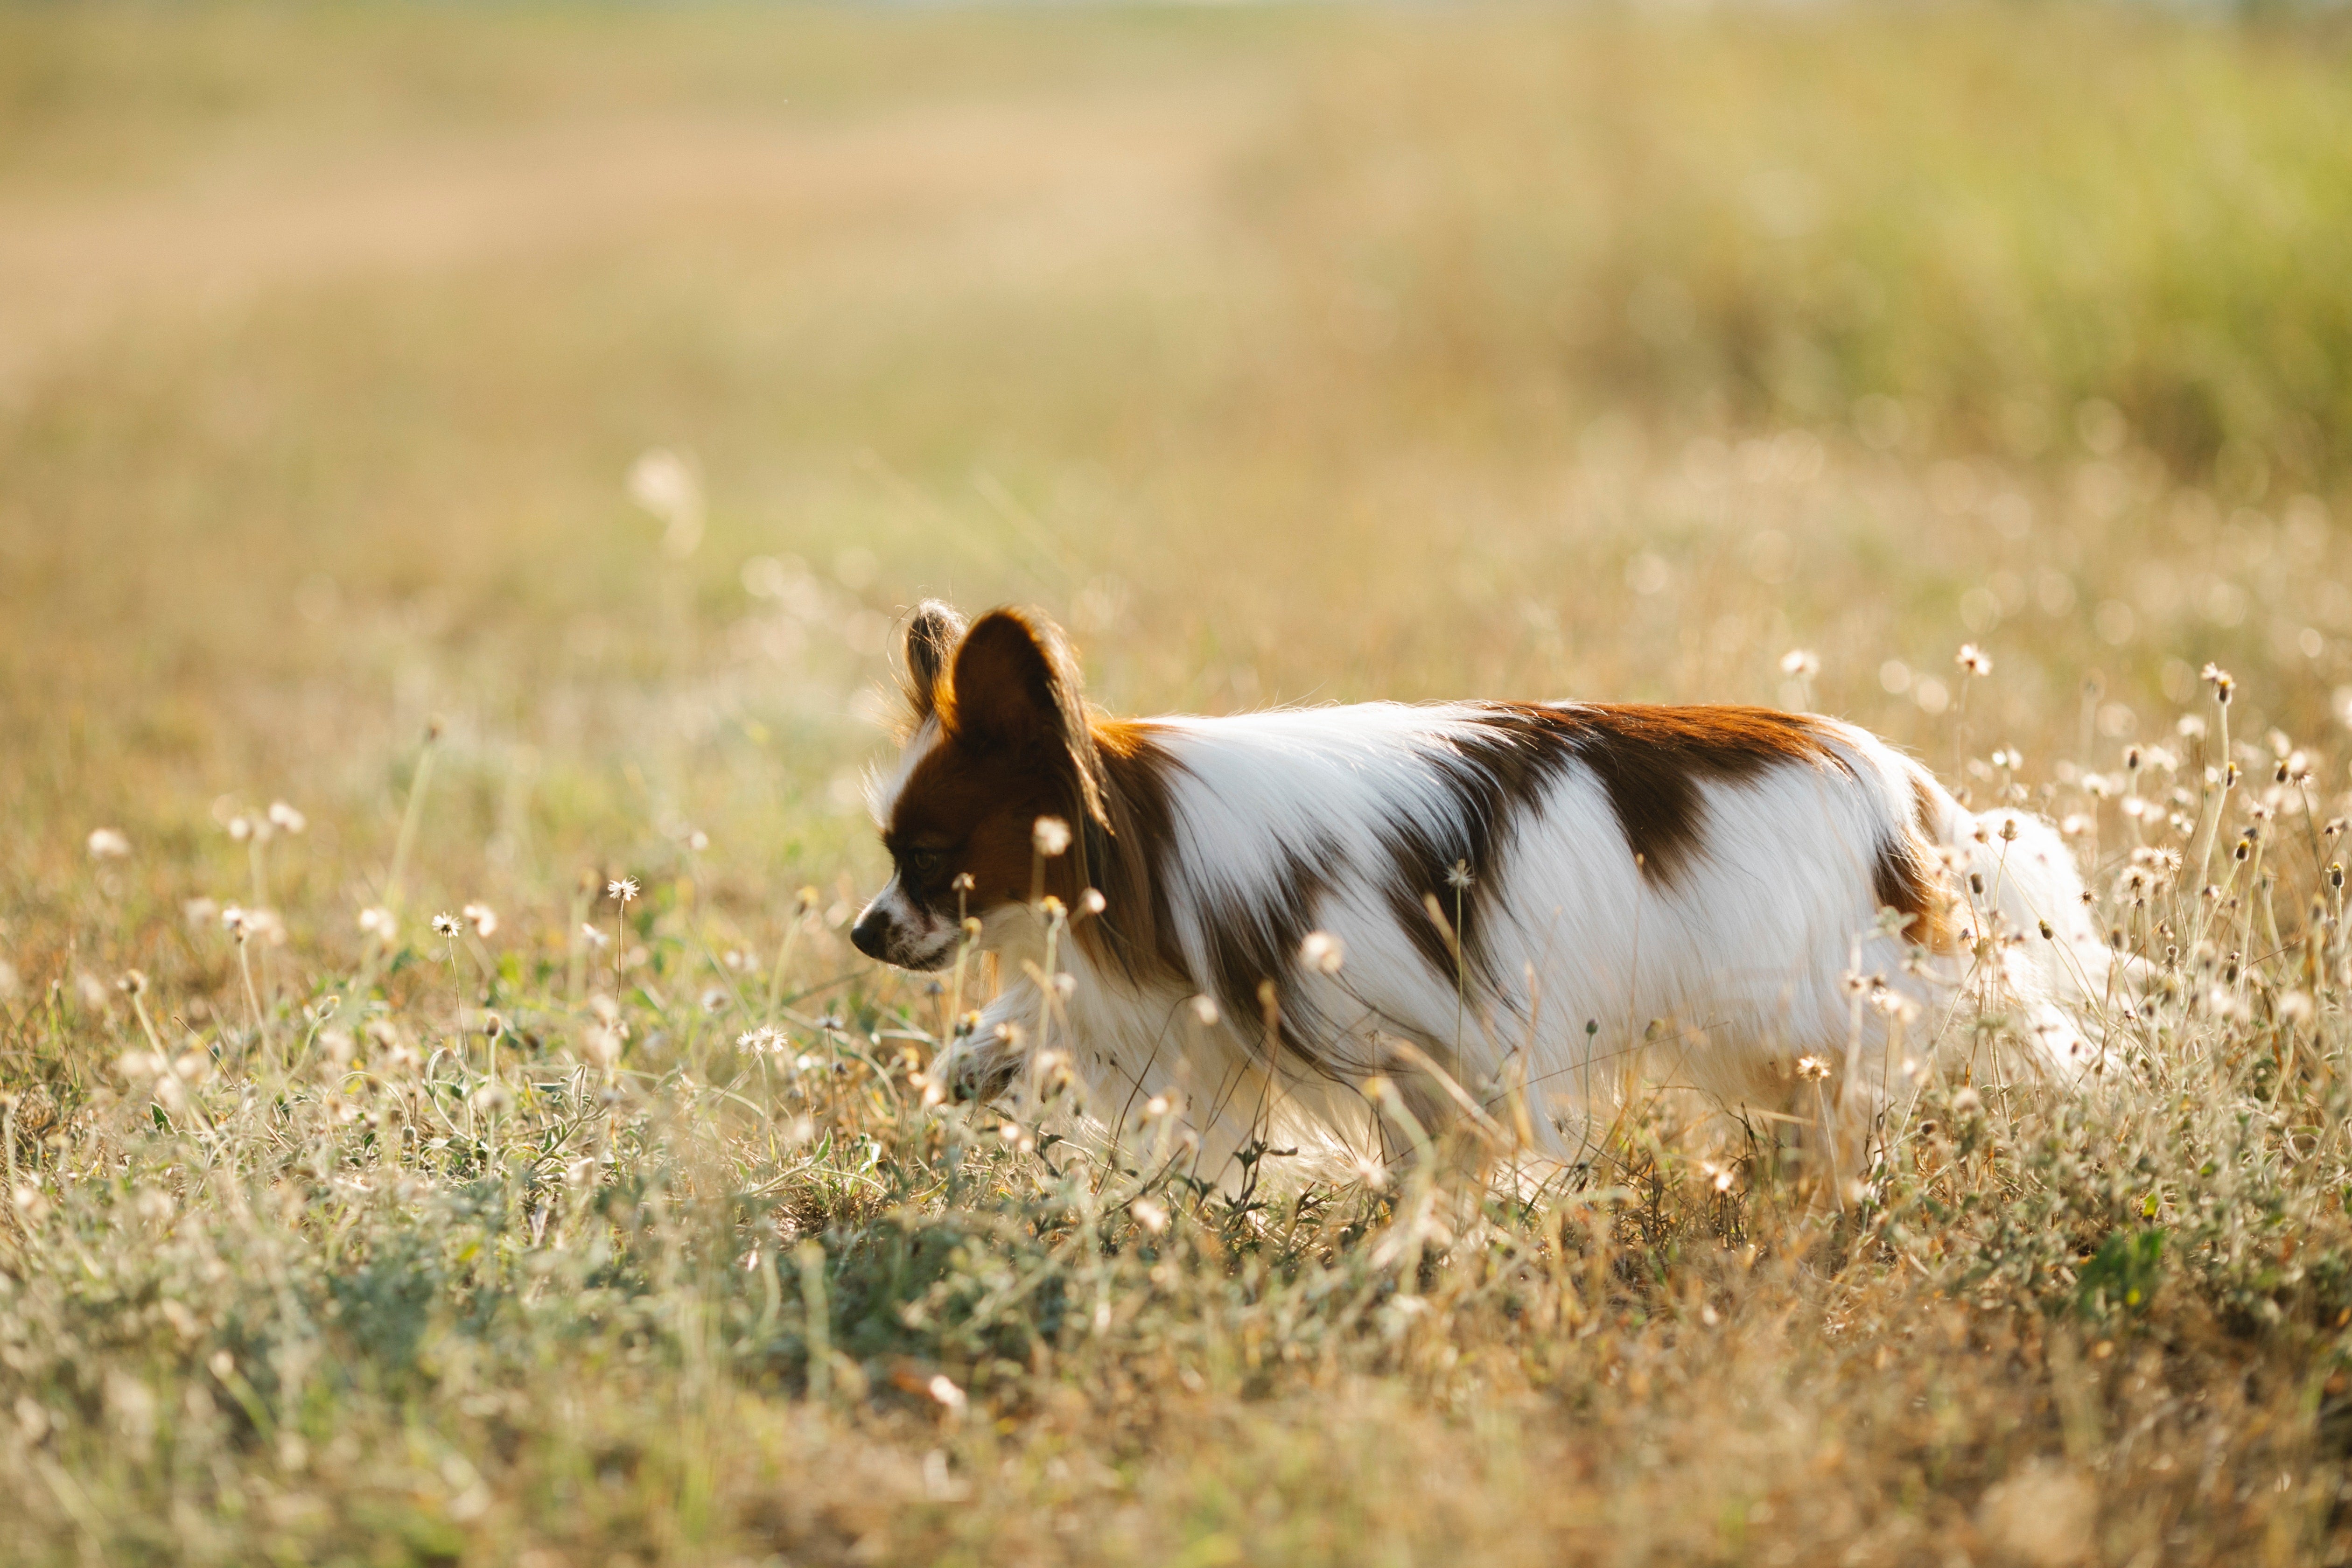 Small brown and white dog in a field